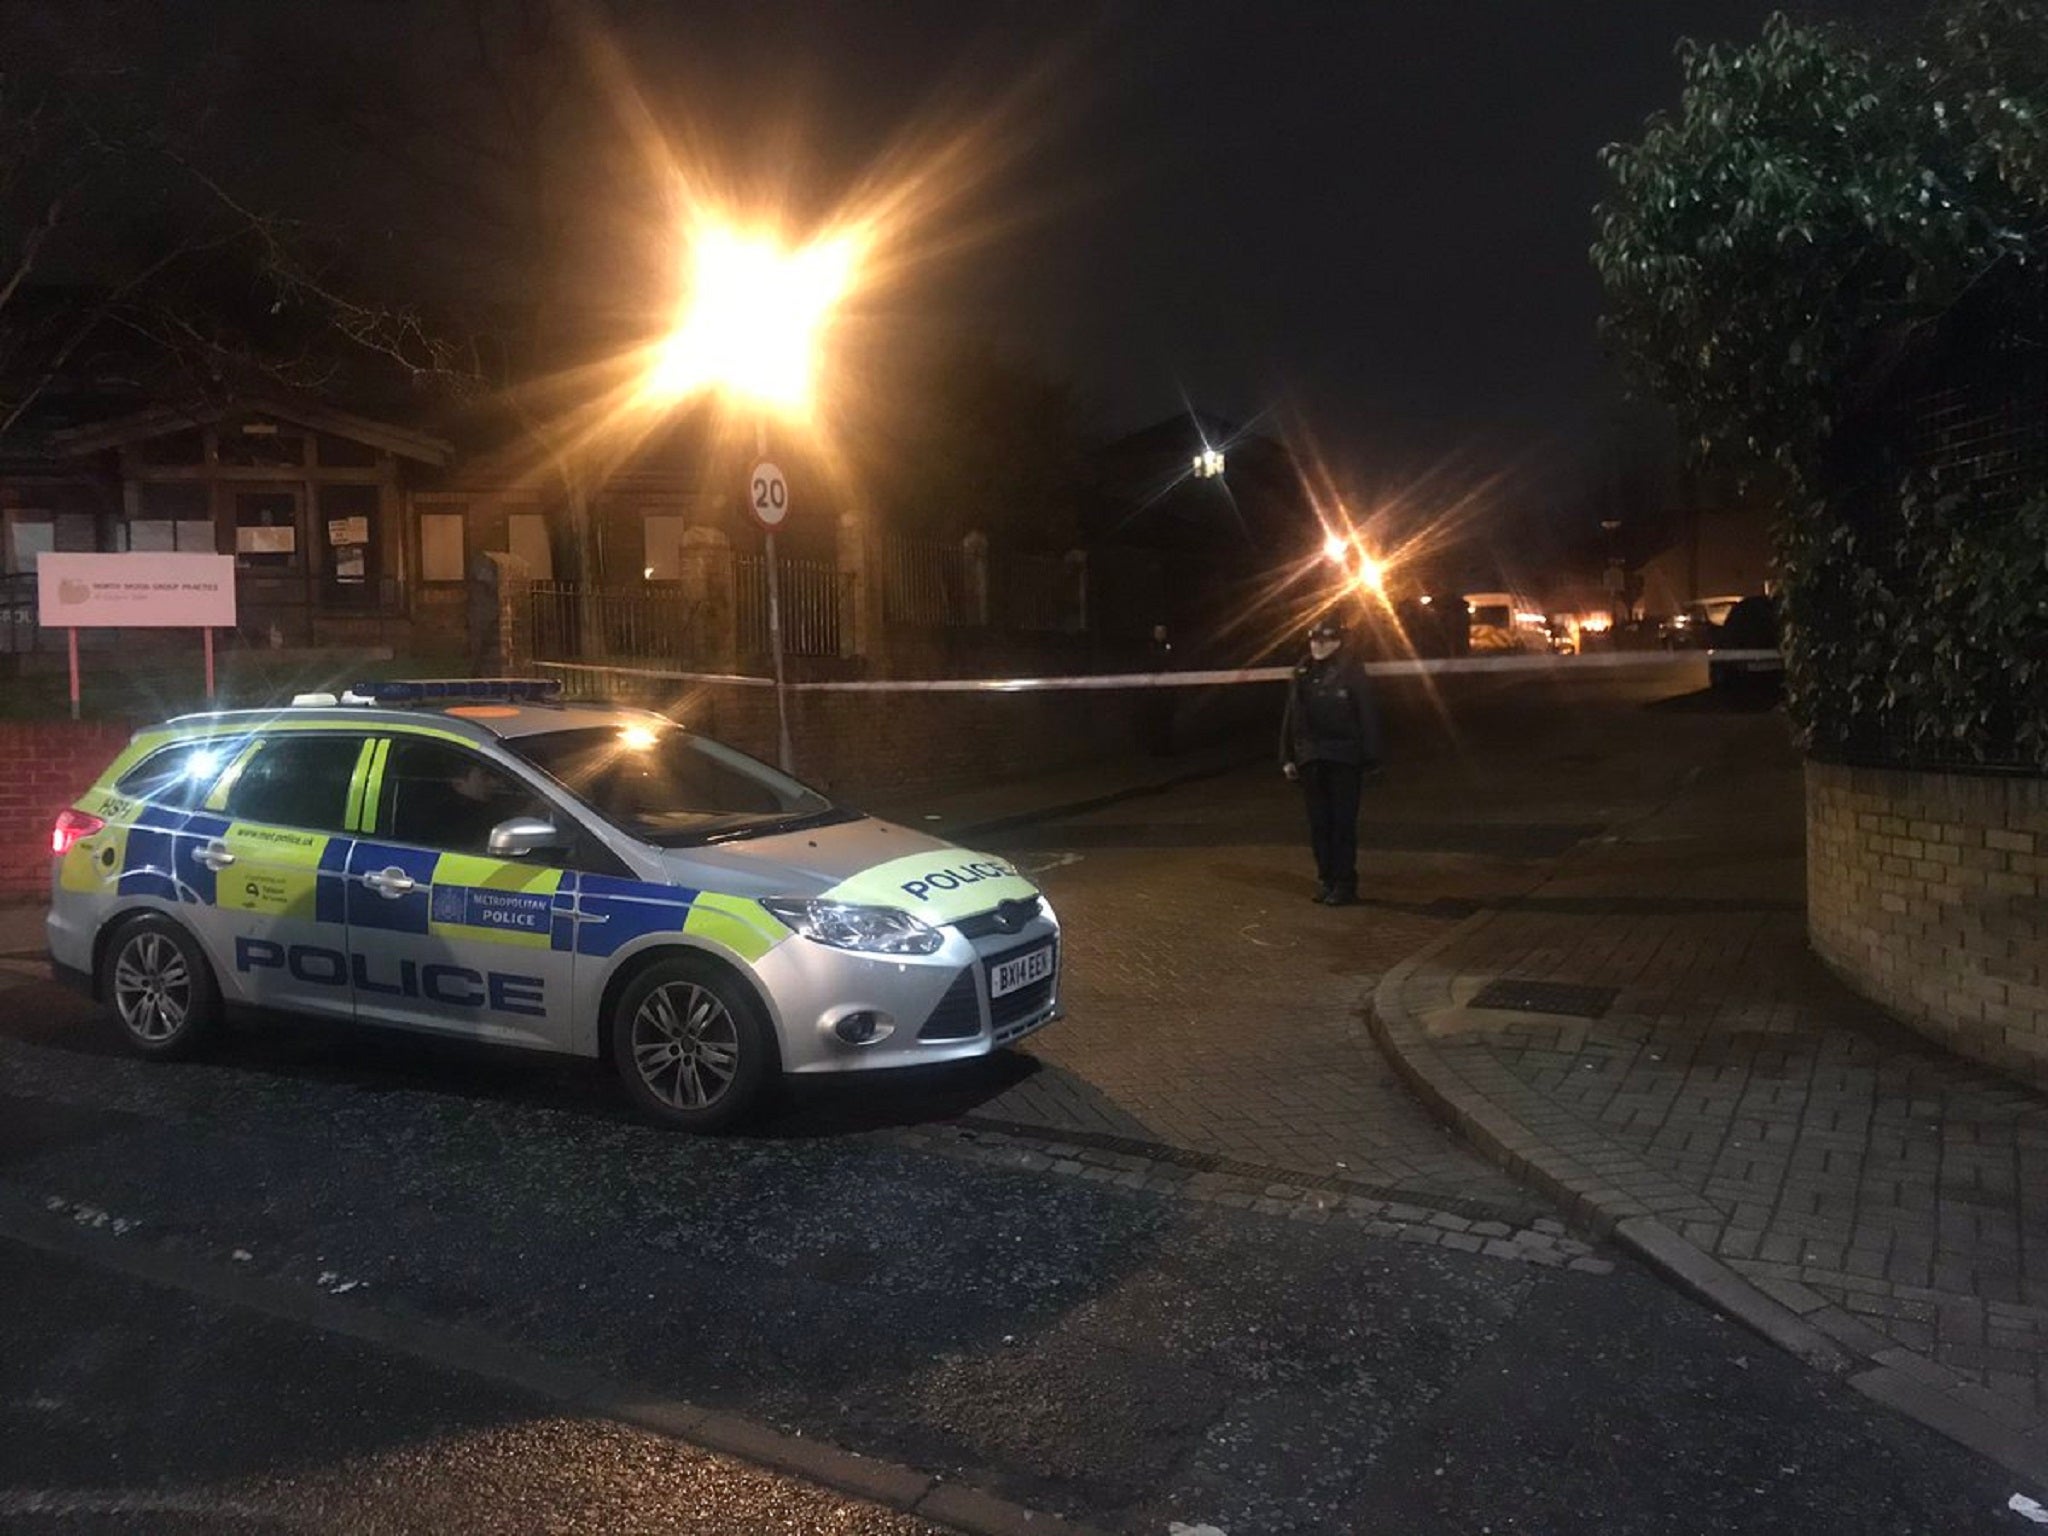 A 15-year-old boy was said to be in a 'potentially life-threatening condition' in hospital after being shot in Unity Close, in West Norwood, Lambeth, southeast London, on 22 January, 2019.